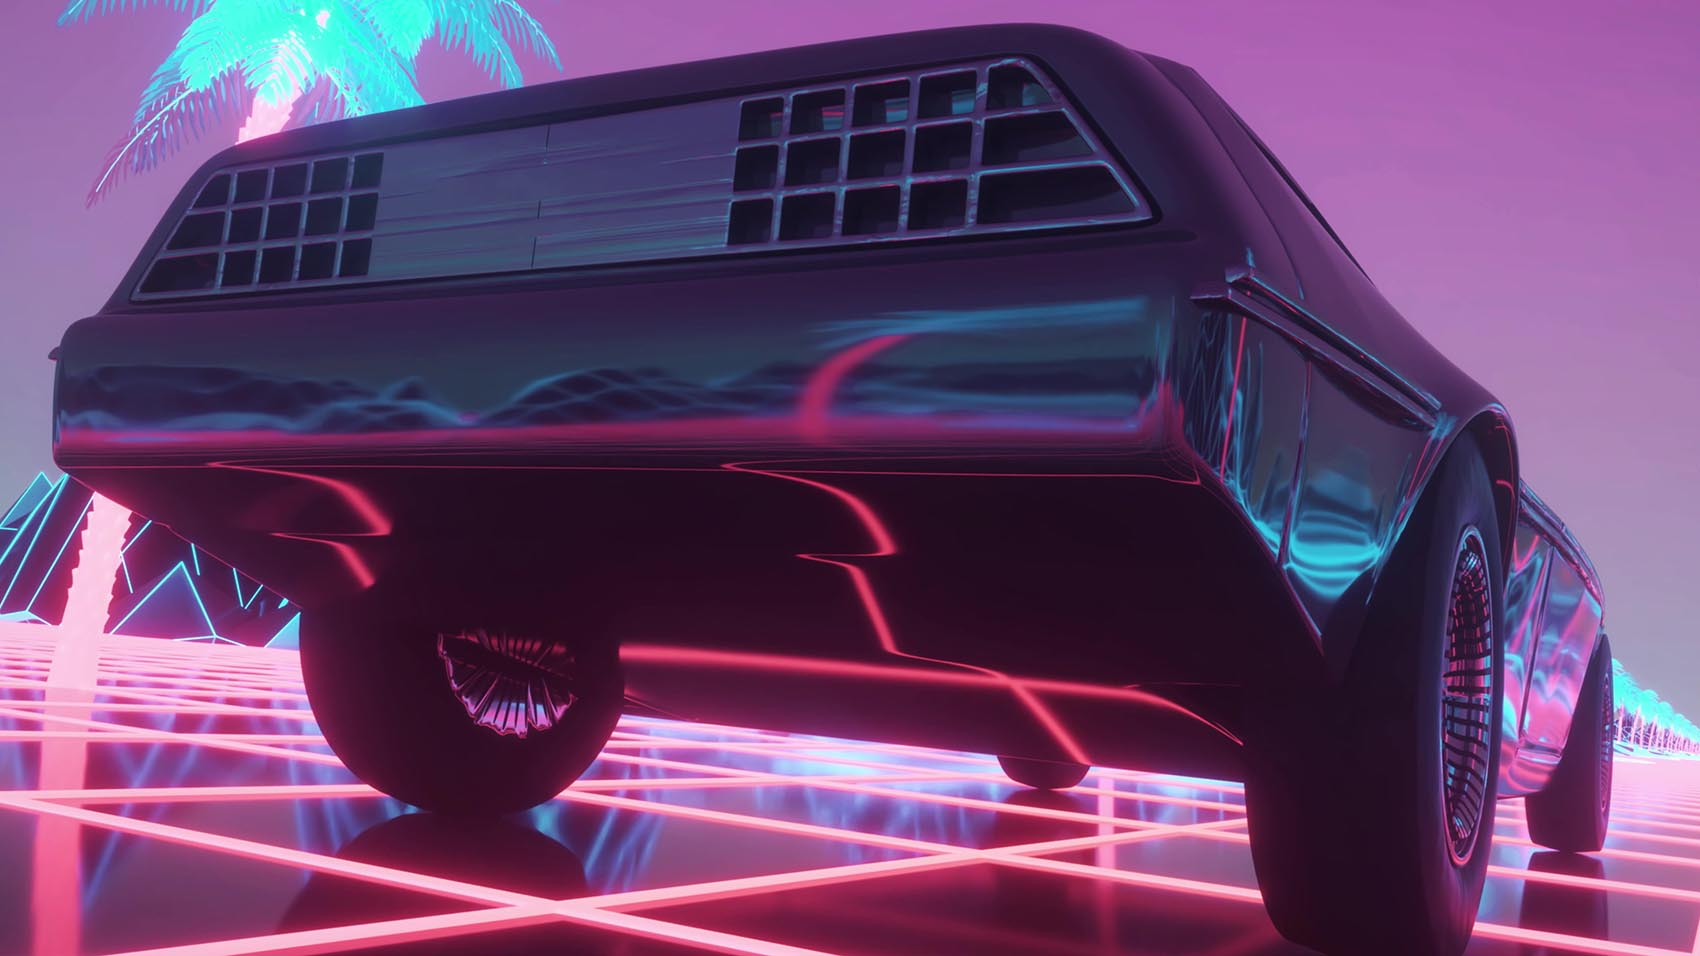 The 7 Different Types of Retrowave Music